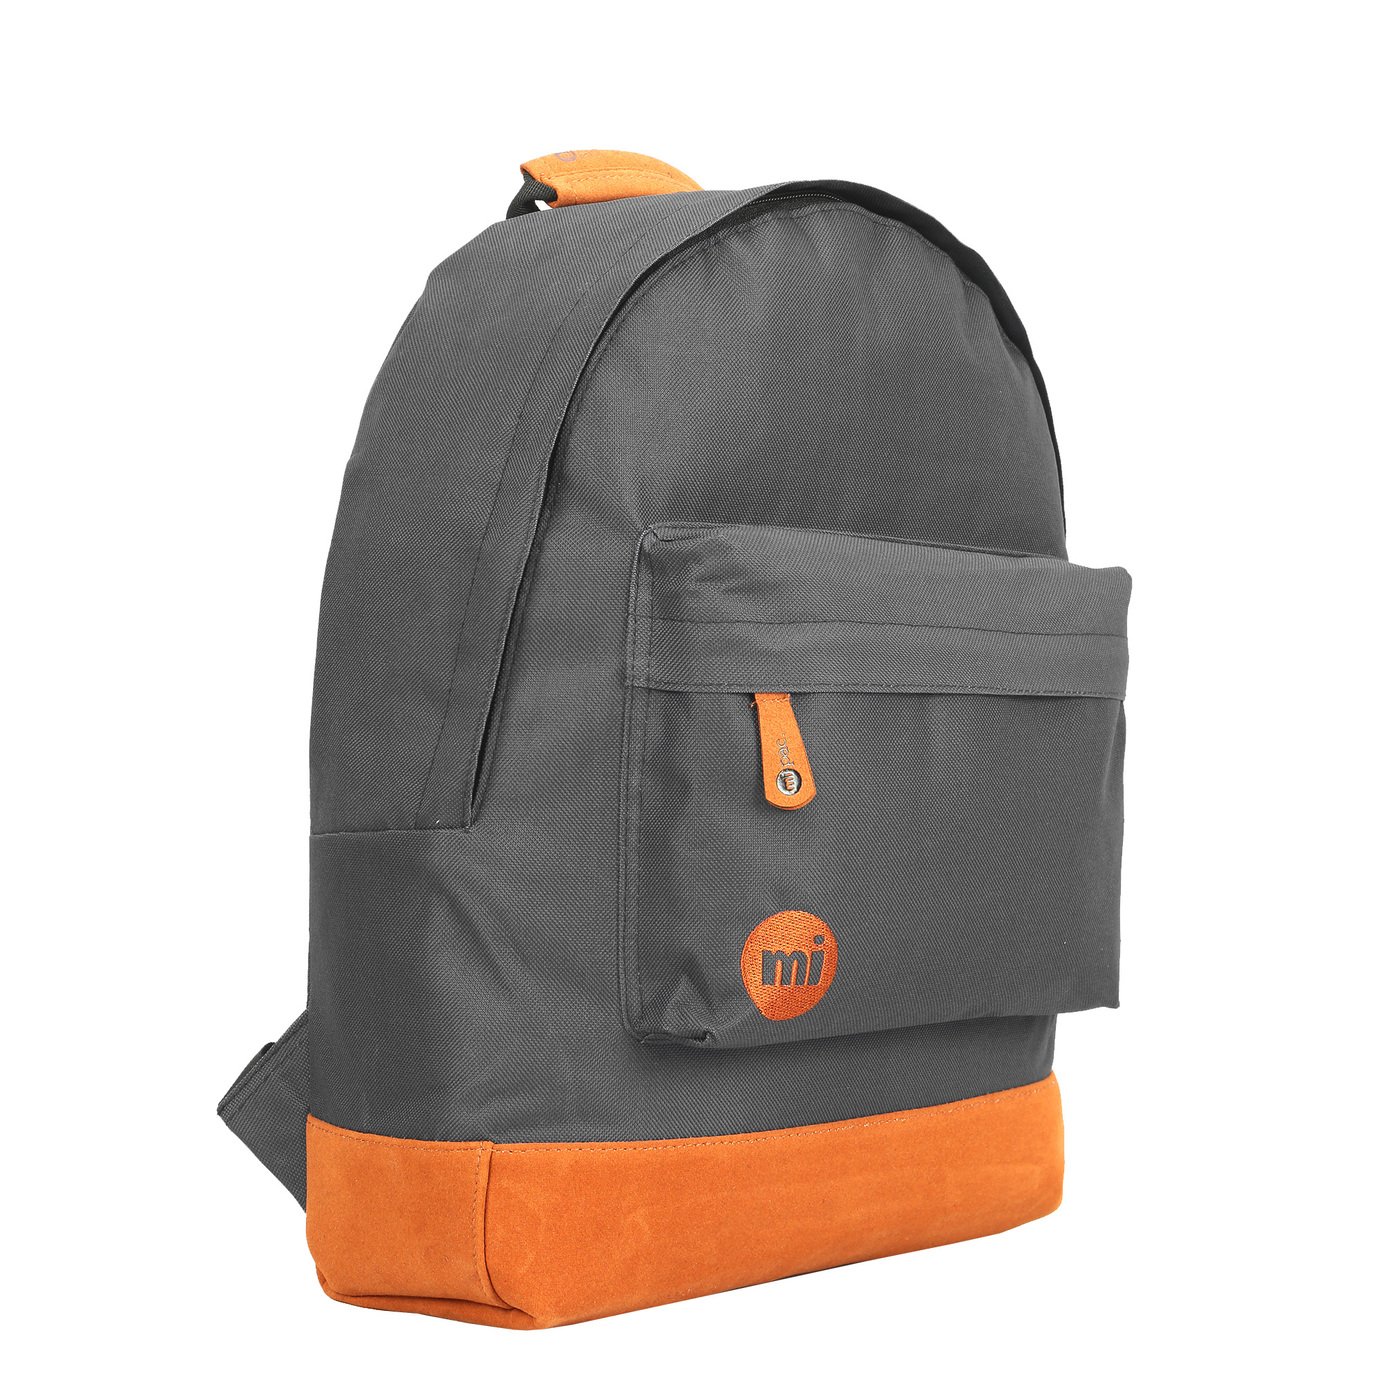 Mi-Pac 17L Backpack Review